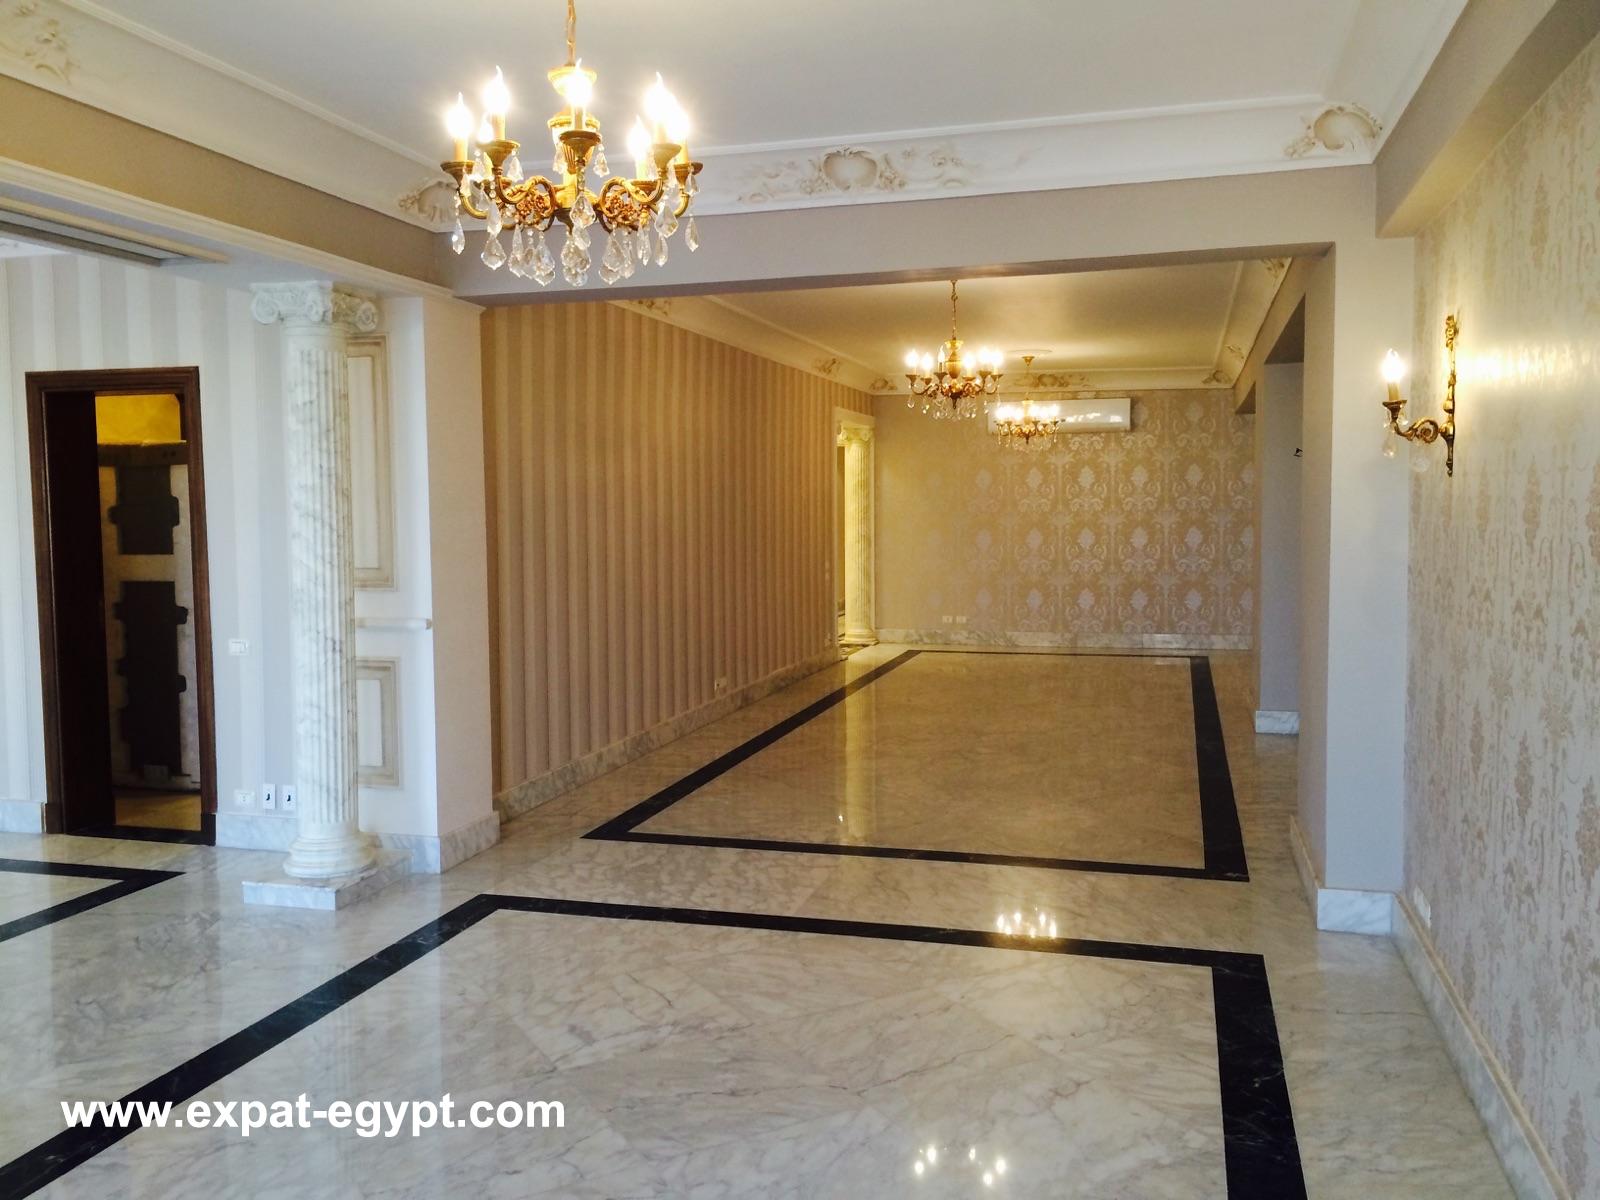 A great opportunity luxury apartment for Rent  in Corniche El Nile St, El Giza